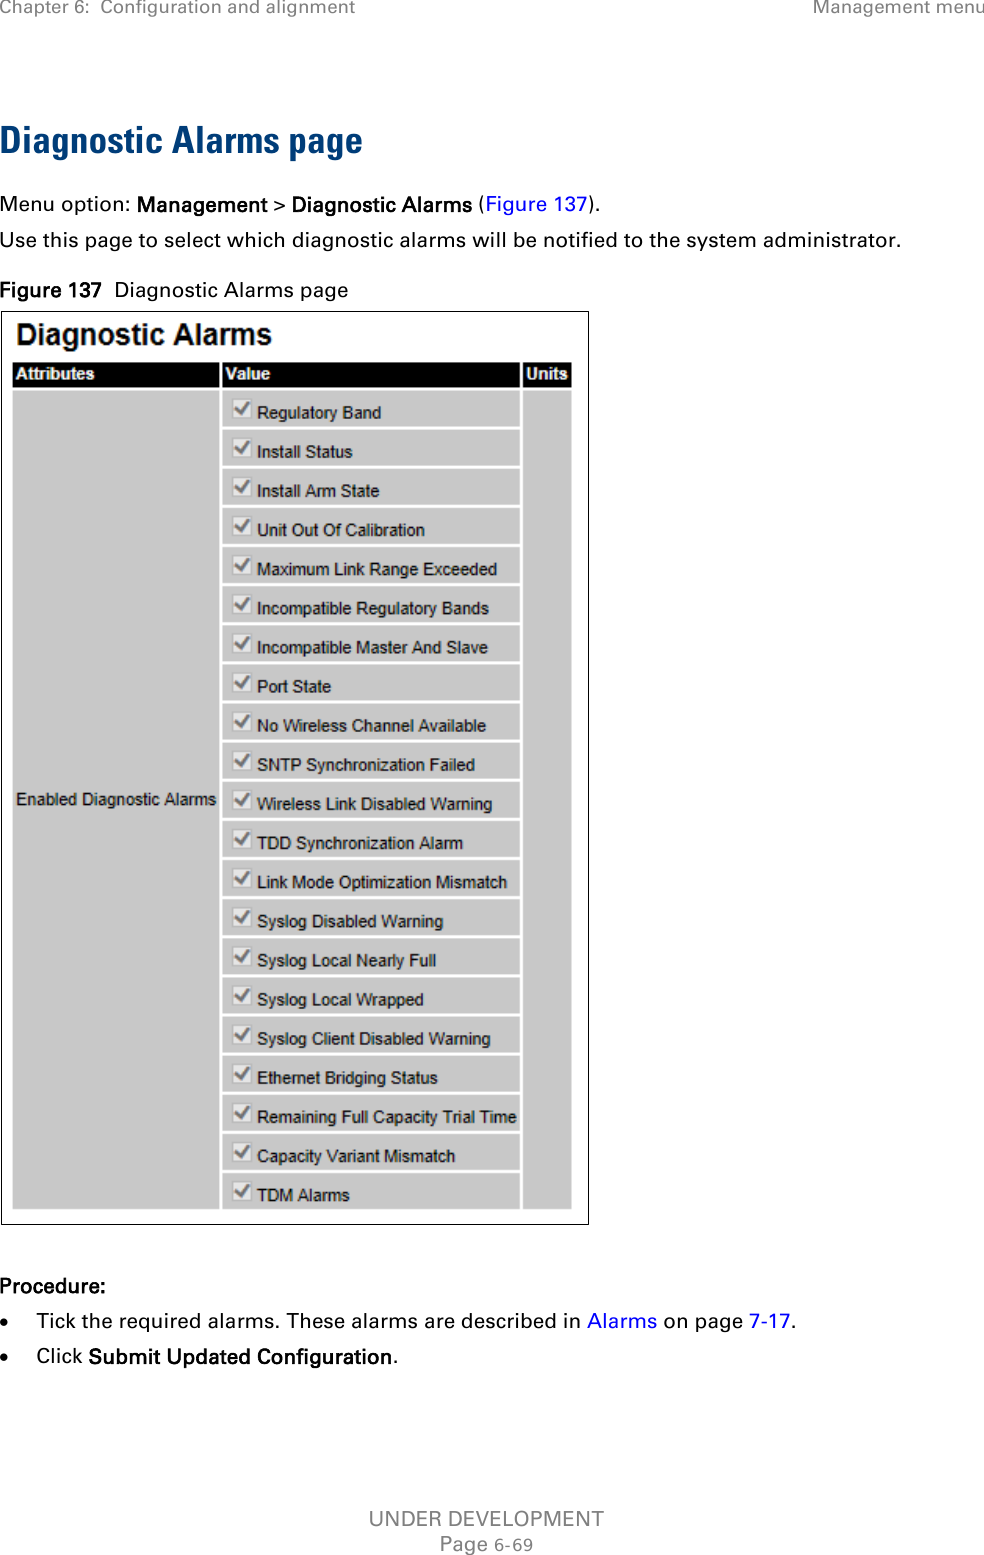 Chapter 6:  Configuration and alignment Management menu  Diagnostic Alarms page Menu option: Management &gt; Diagnostic Alarms (Figure 137). Use this page to select which diagnostic alarms will be notified to the system administrator. Figure 137  Diagnostic Alarms page   Procedure: • Tick the required alarms. These alarms are described in Alarms on page 7-17. • Click Submit Updated Configuration.  UNDER DEVELOPMENT Page 6-69 